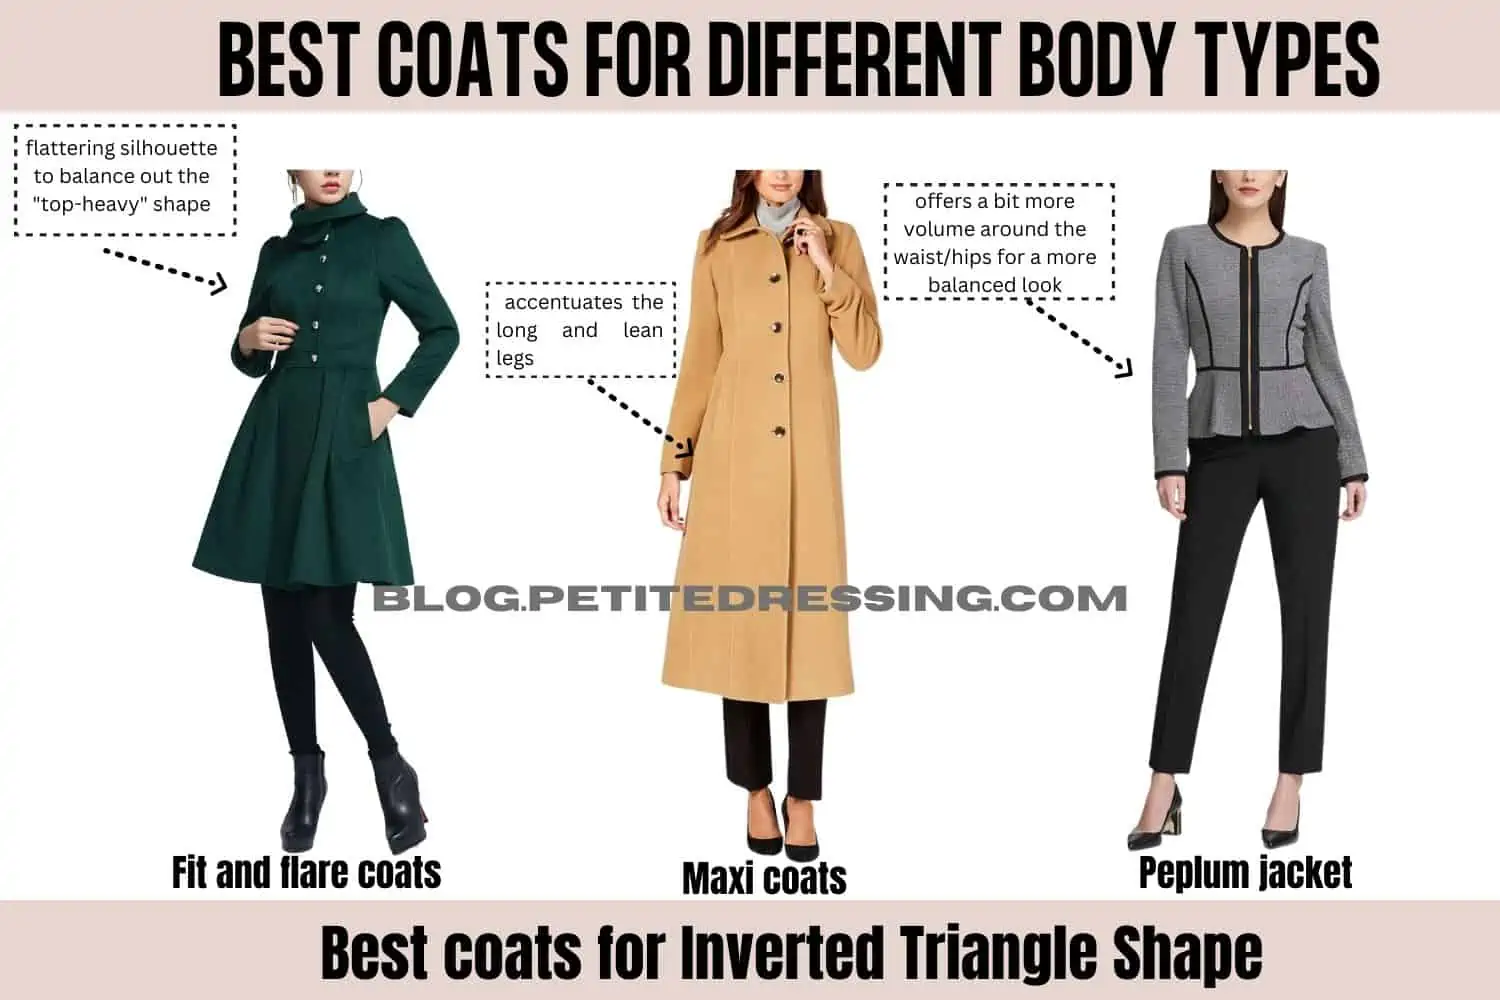 Jacket Fashion for Different Body Shapes, by Tshebbe Shbsbs